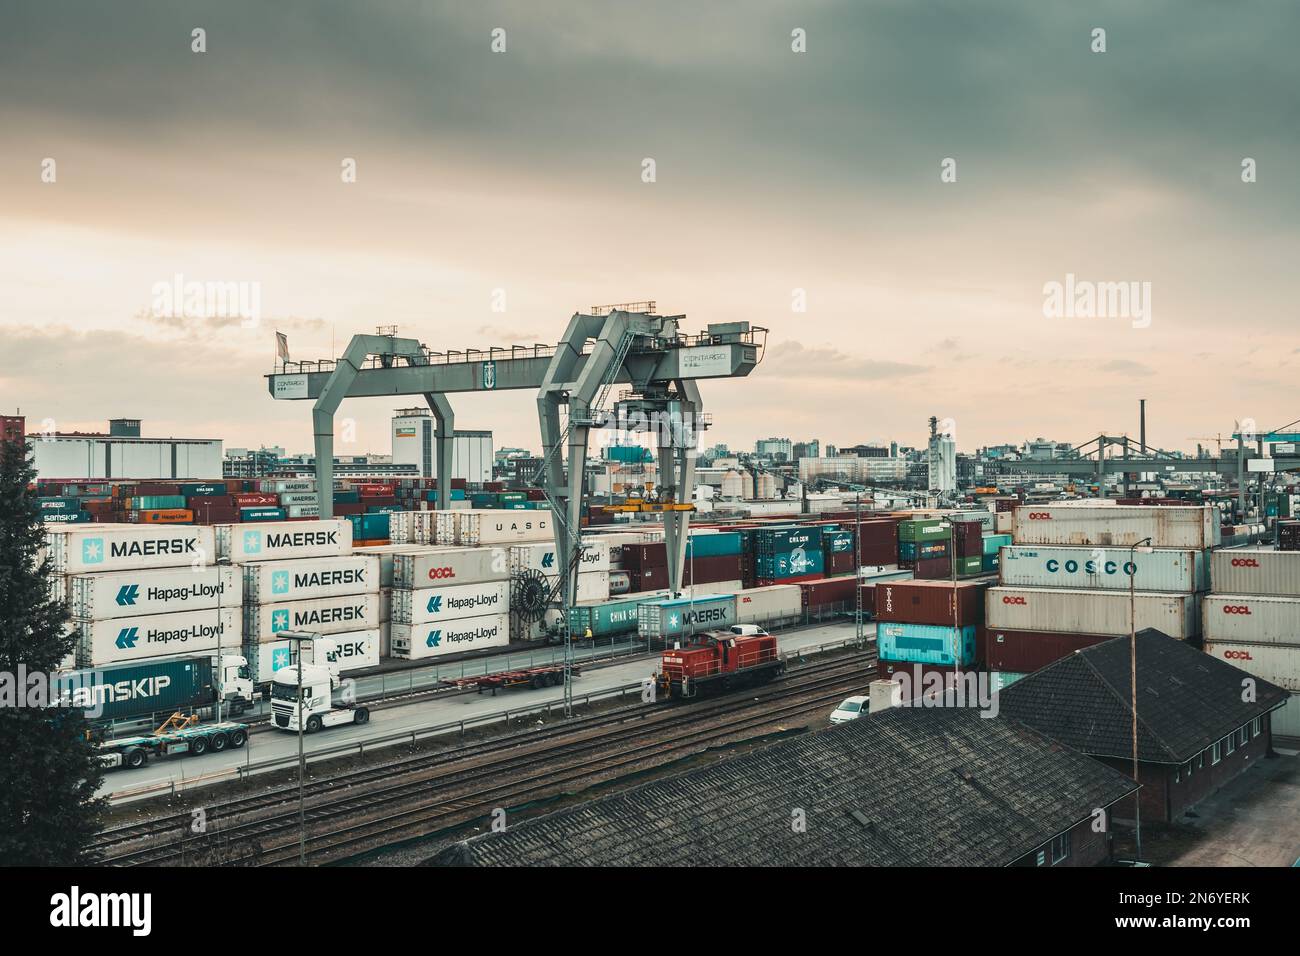 Mannheim, Germany - 26.03.2021: Freight containers in the container port of the inland port of Mannheim on a cloudy day Stock Photo